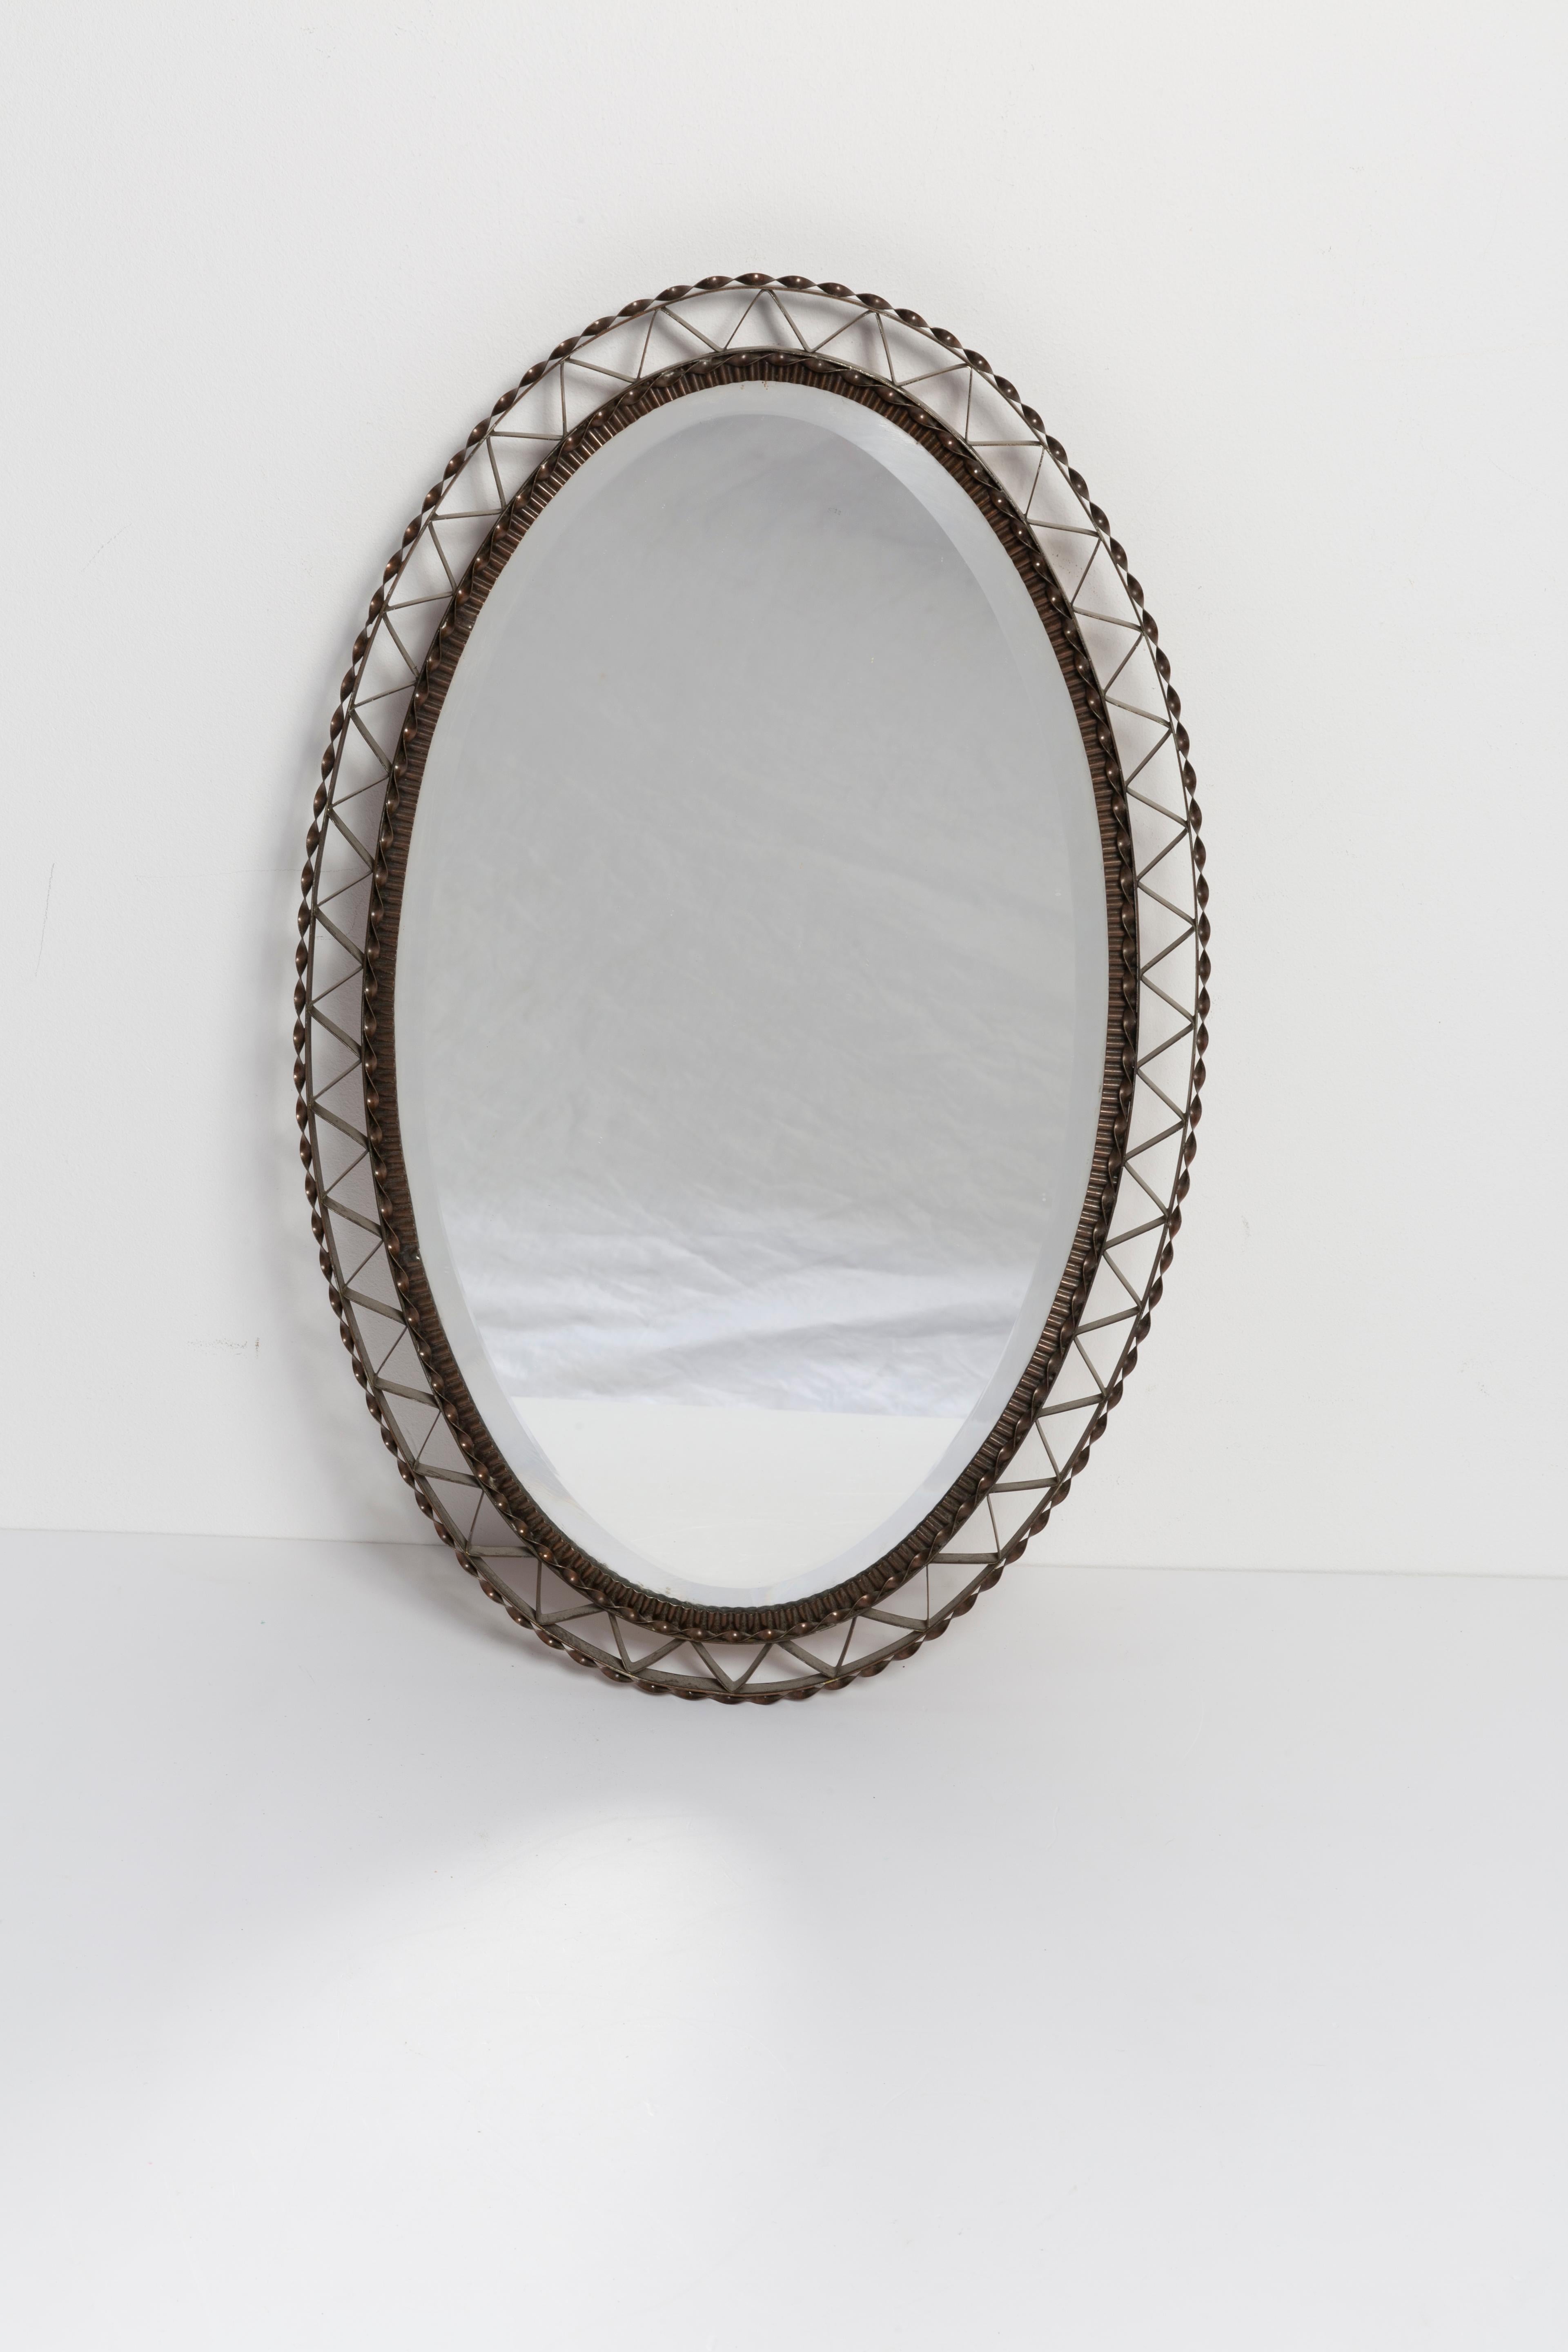 A mirror in a dark decorative frame from Italy. The frame is made of metal. Mirror is in very good vintage condition, no damage or cracks in the frame. Original glass. Beautiful piece for every interior! Only one unique piece.